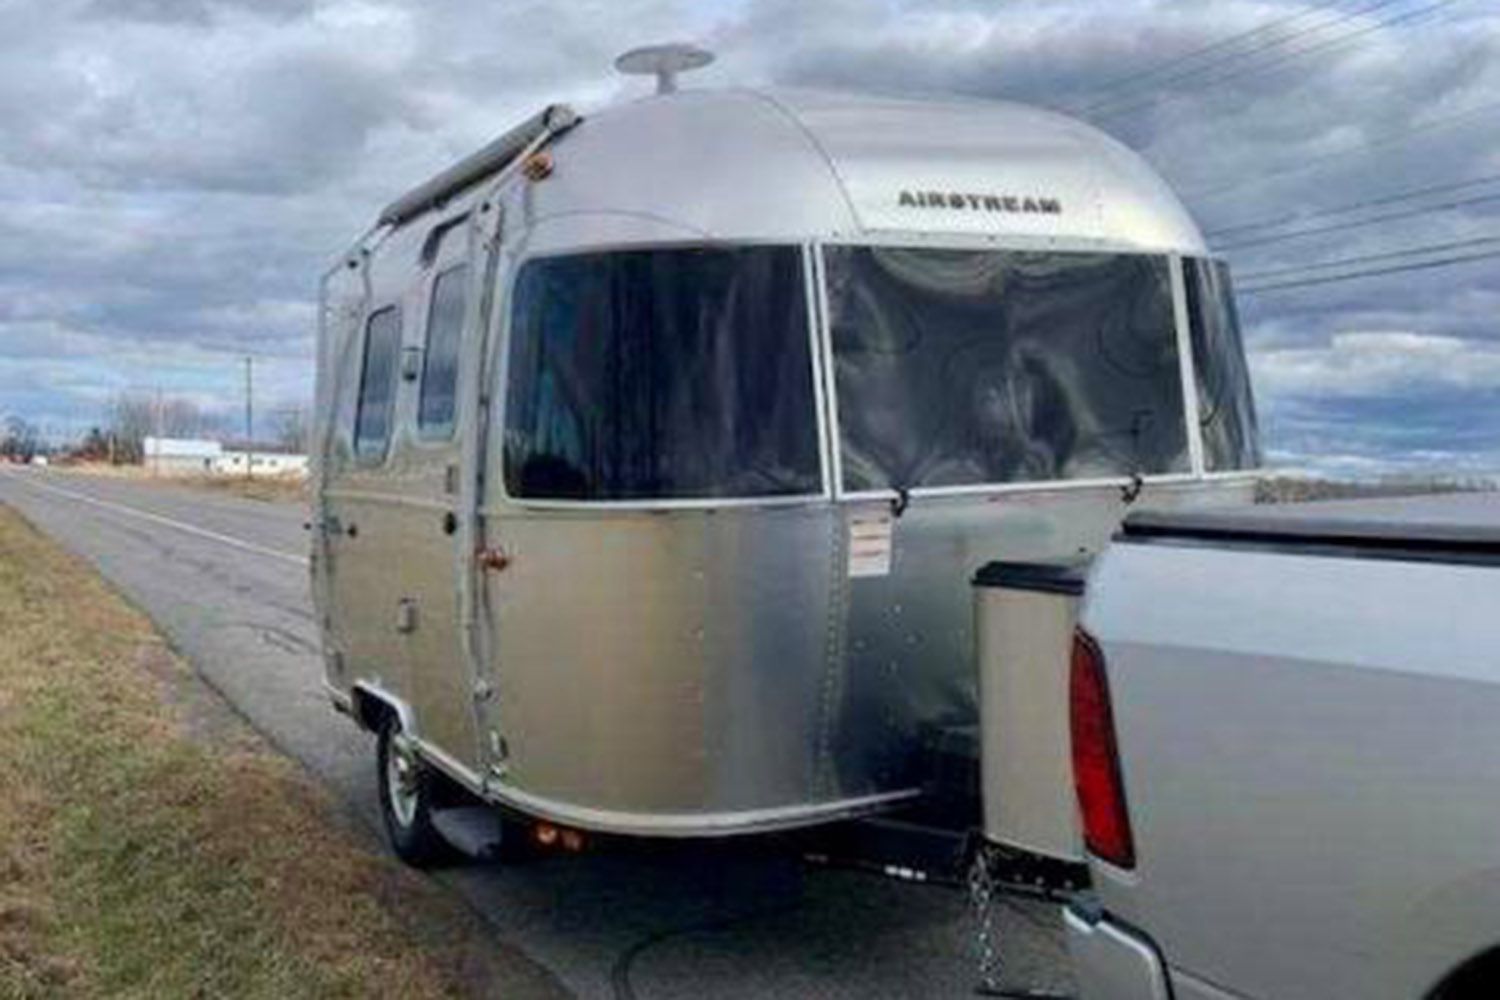 New York Pediatrician, 58, Dies After Falling from Moving Airstream [Video]